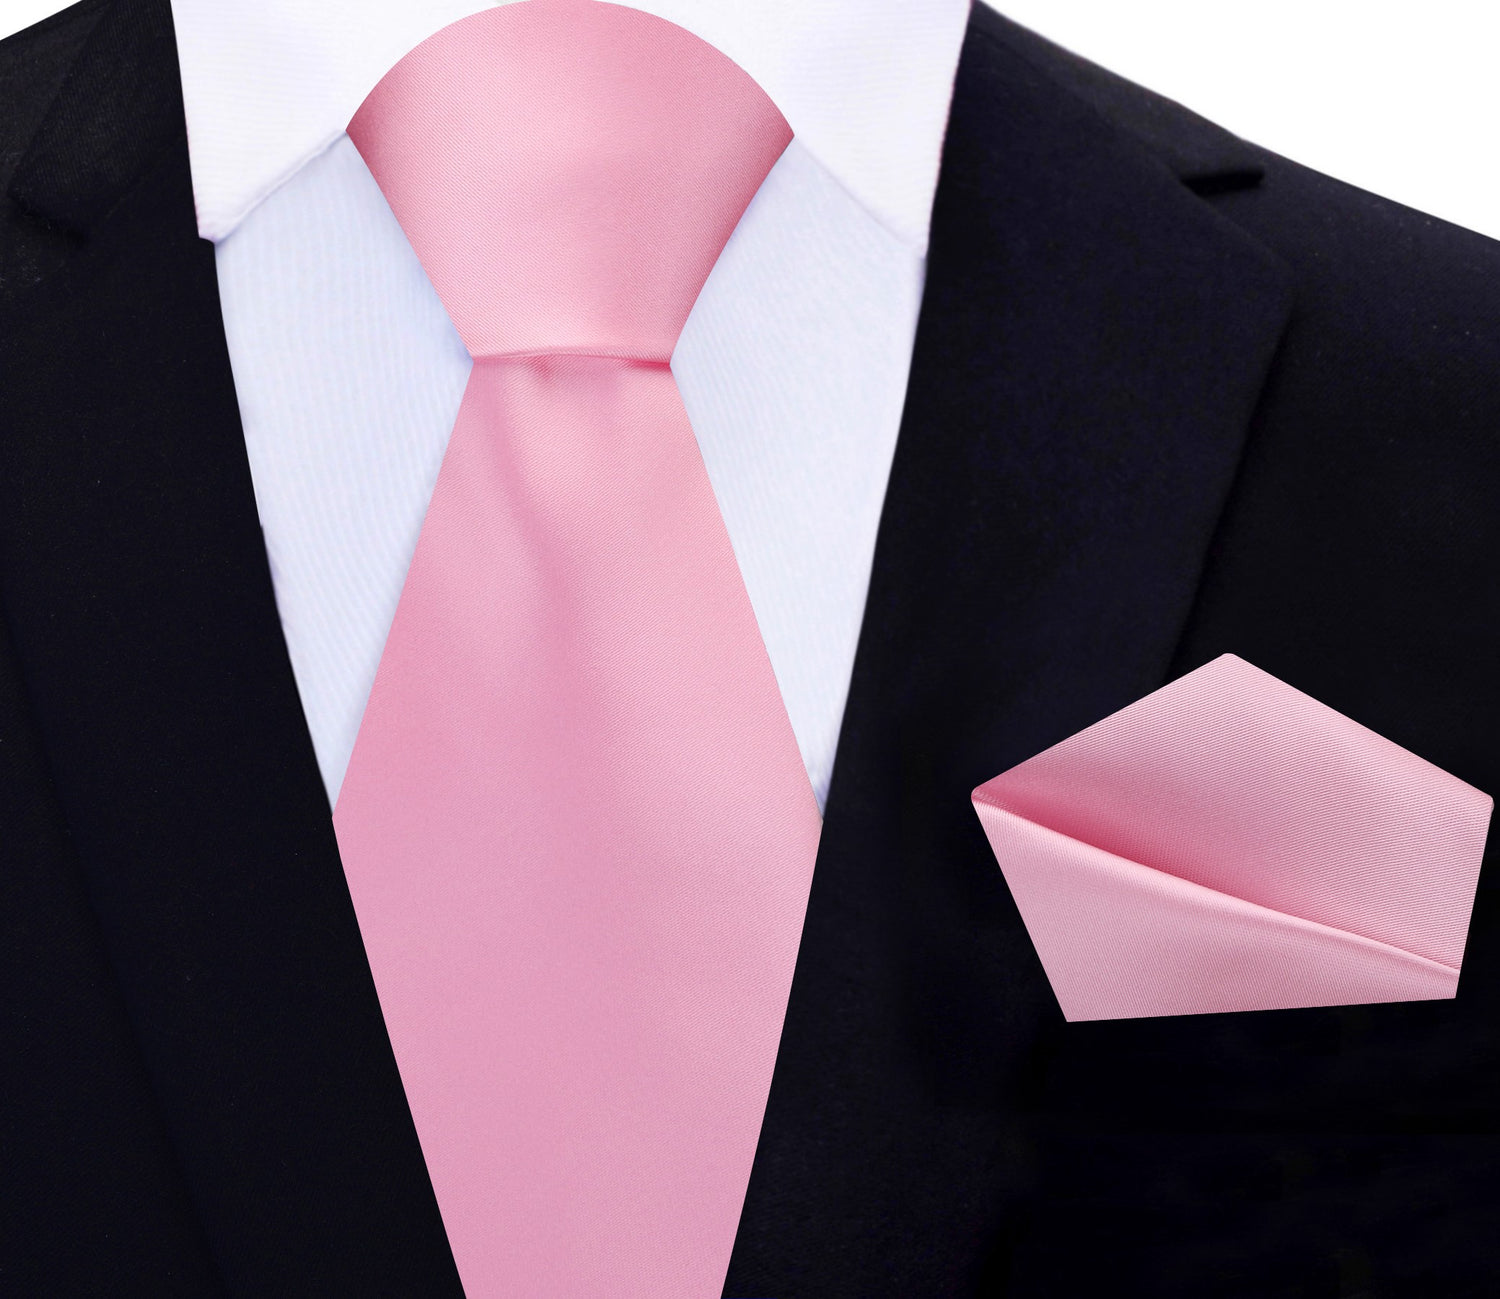 Main View: Baby Pink Tie and Pocket Square